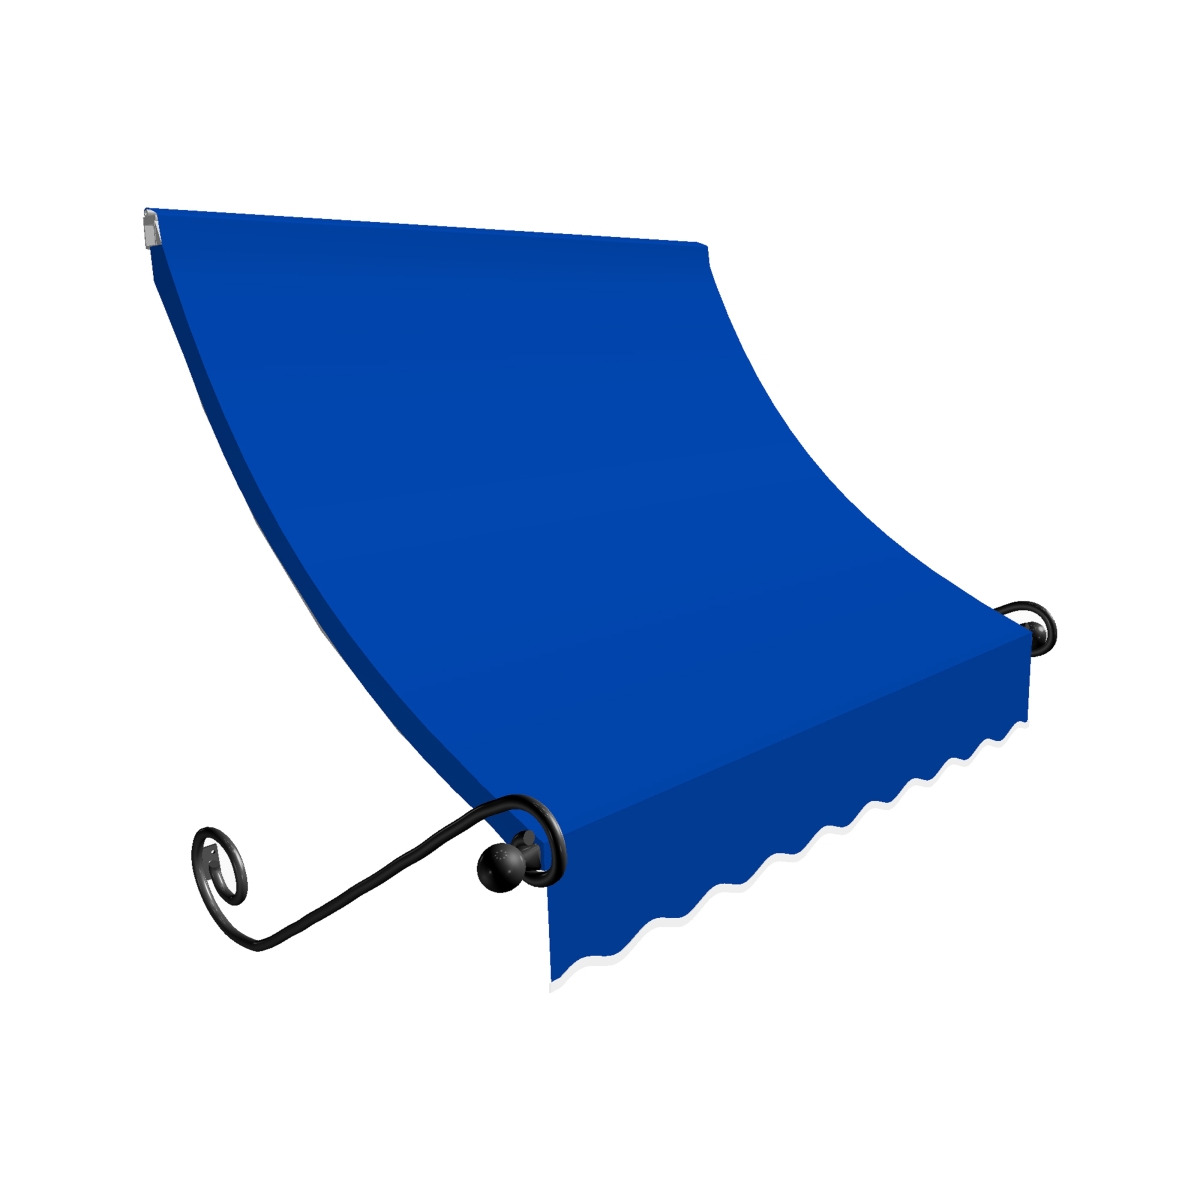 Ch22-us-8bb 8.38 Ft. Charleston Window & Entry Awning, Bright Blue - 31 X 24 In.